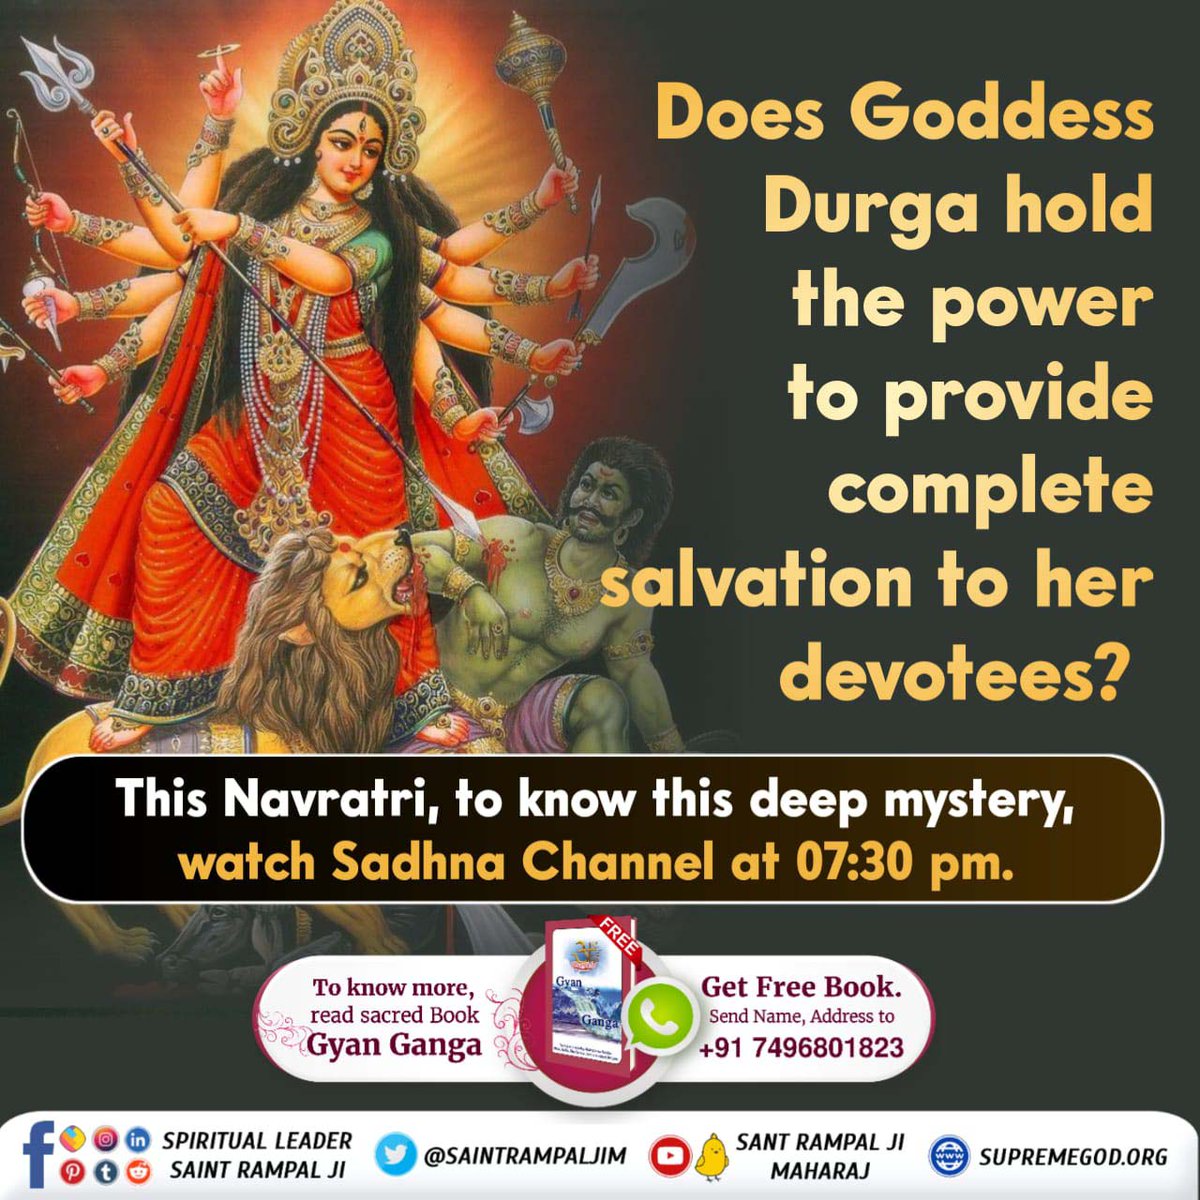 #भूखेबच्चेदेख_मां_कैसे_खुश_हो The innocent devotees have the misconceptions that Devi Durga Ji Supreme. But the fact is that all Scriptures from all the religions confirm Kabir Saheb as the Supreme God.